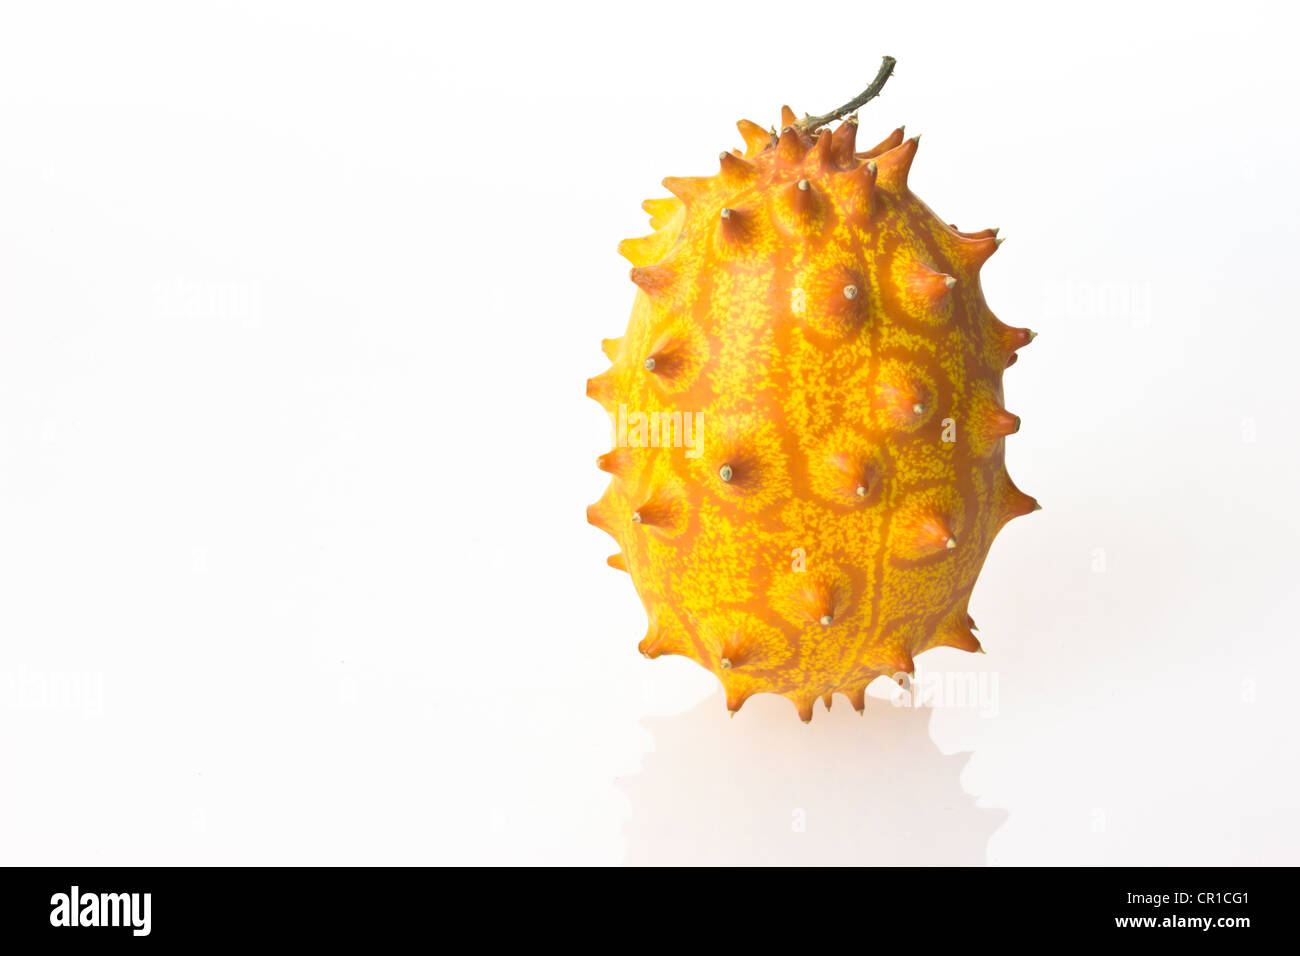 Kiwano, Horned Melon or African Horned Cucumber (Cucumis metuliferus) Stock Photo